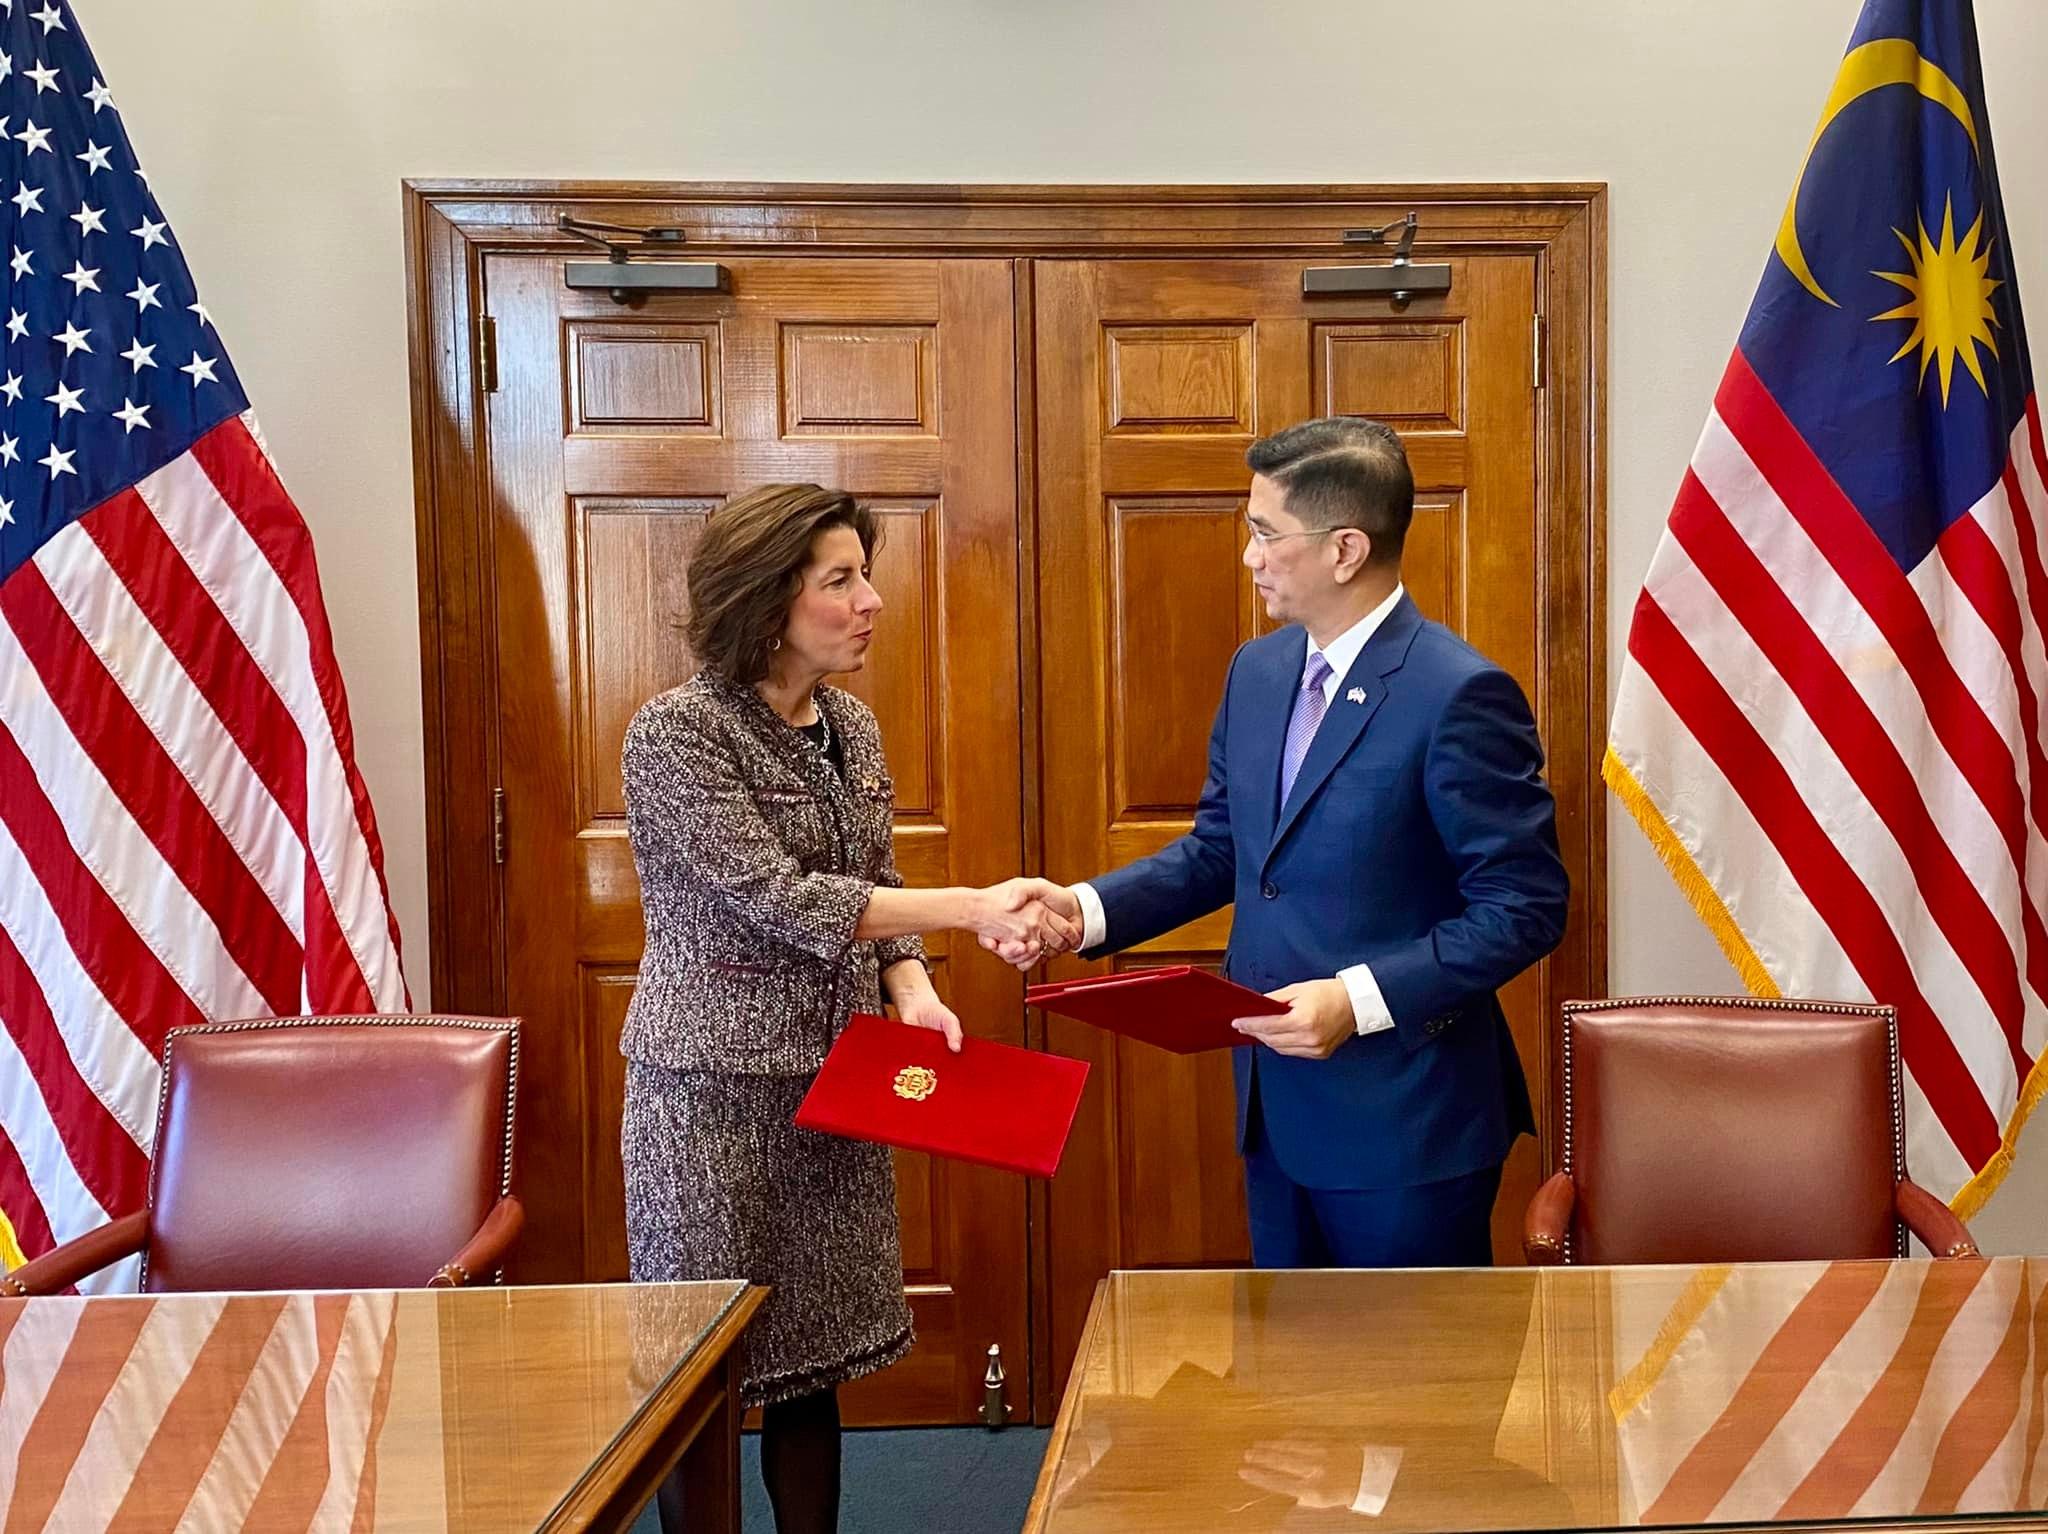 International Trade and Industry Minister Mohamed Azmin Ali with US Secretary of Commerce Gina Raimondo after signing a memorandum of cooperation to further strengthen the semiconductor supply chain resiliency. Photo: Facebook